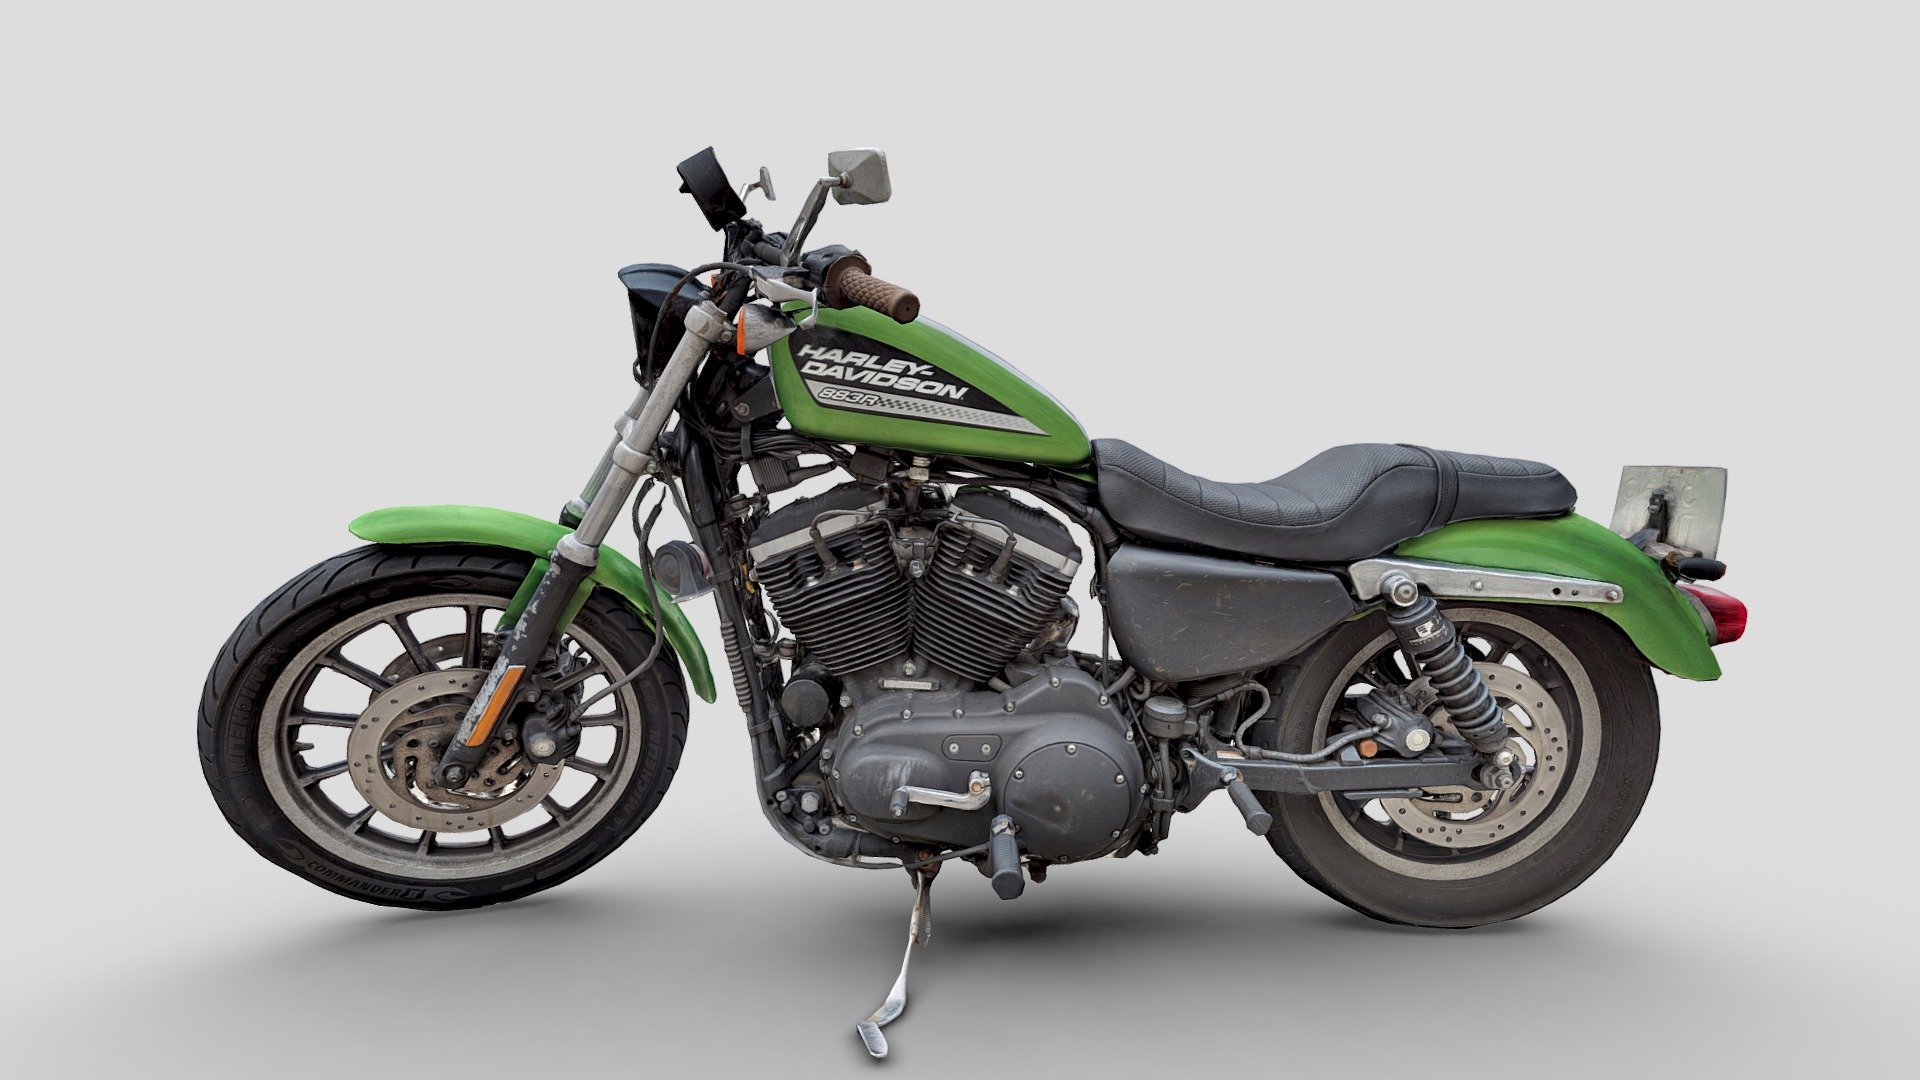 The Harley-Davidson Sportster is a line of motorcycles produced continuously since 1957 by Harley-Davidson. Sportster models are designated in Harley-Davidson's product code by beginning with &ldquo;XL